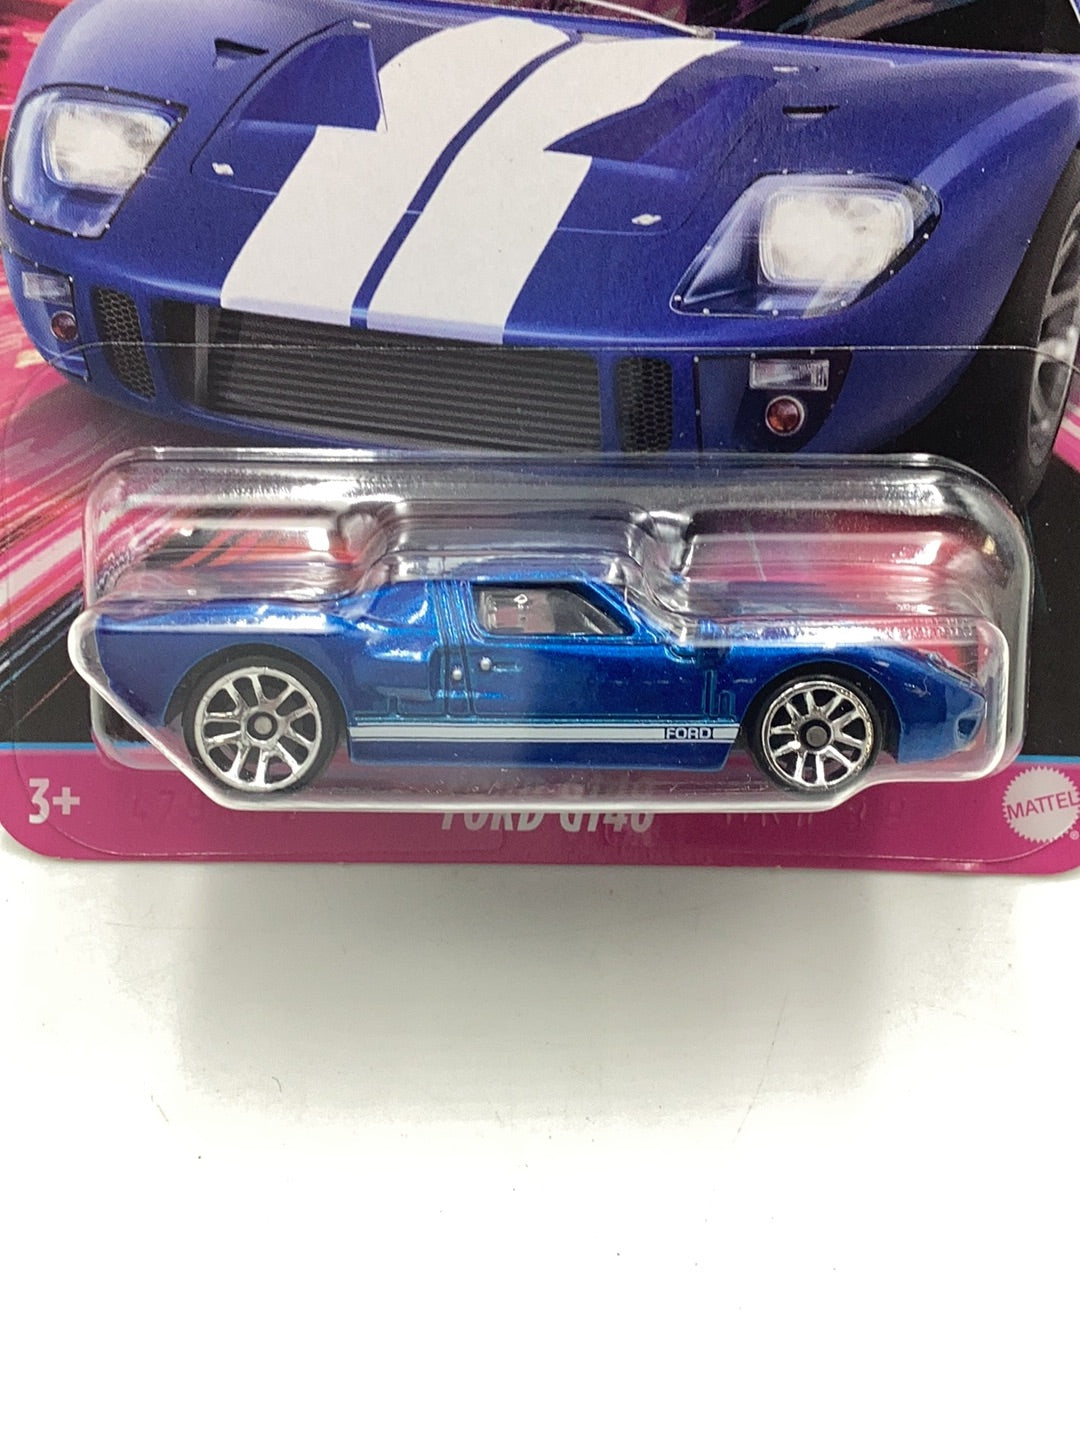 2024 Hot wheels fast and furious Women of Fast Ford GT-40 4/5 LL4